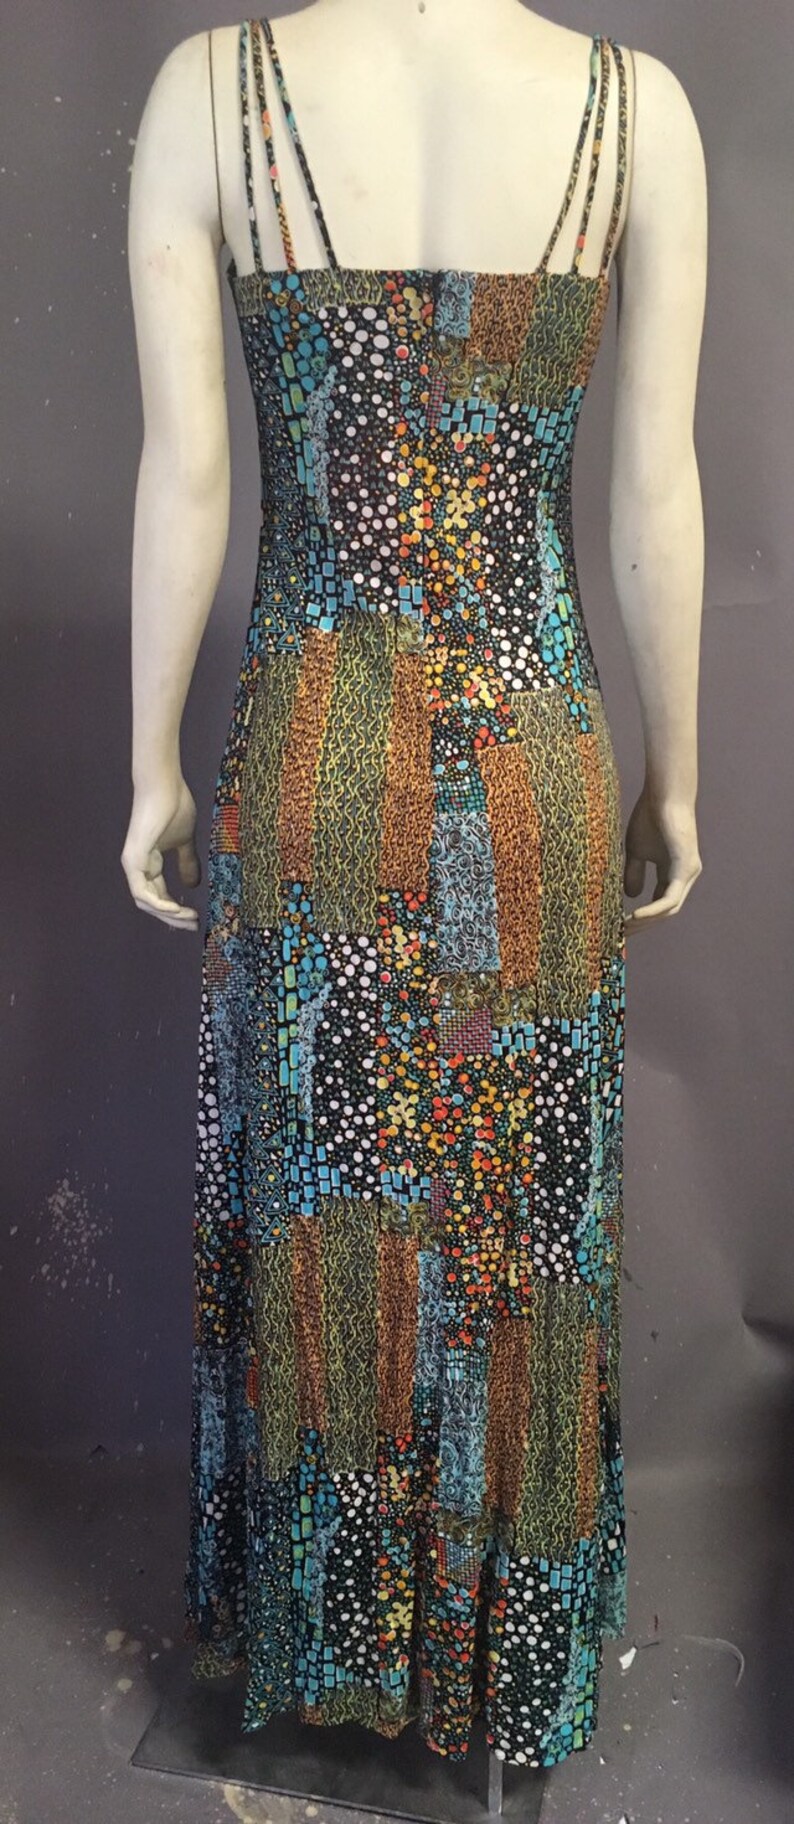 60s 70s psychedelic print dress/ poly jersey dress/ rare pucci-esque patchwork print/ bust is 36 image 8